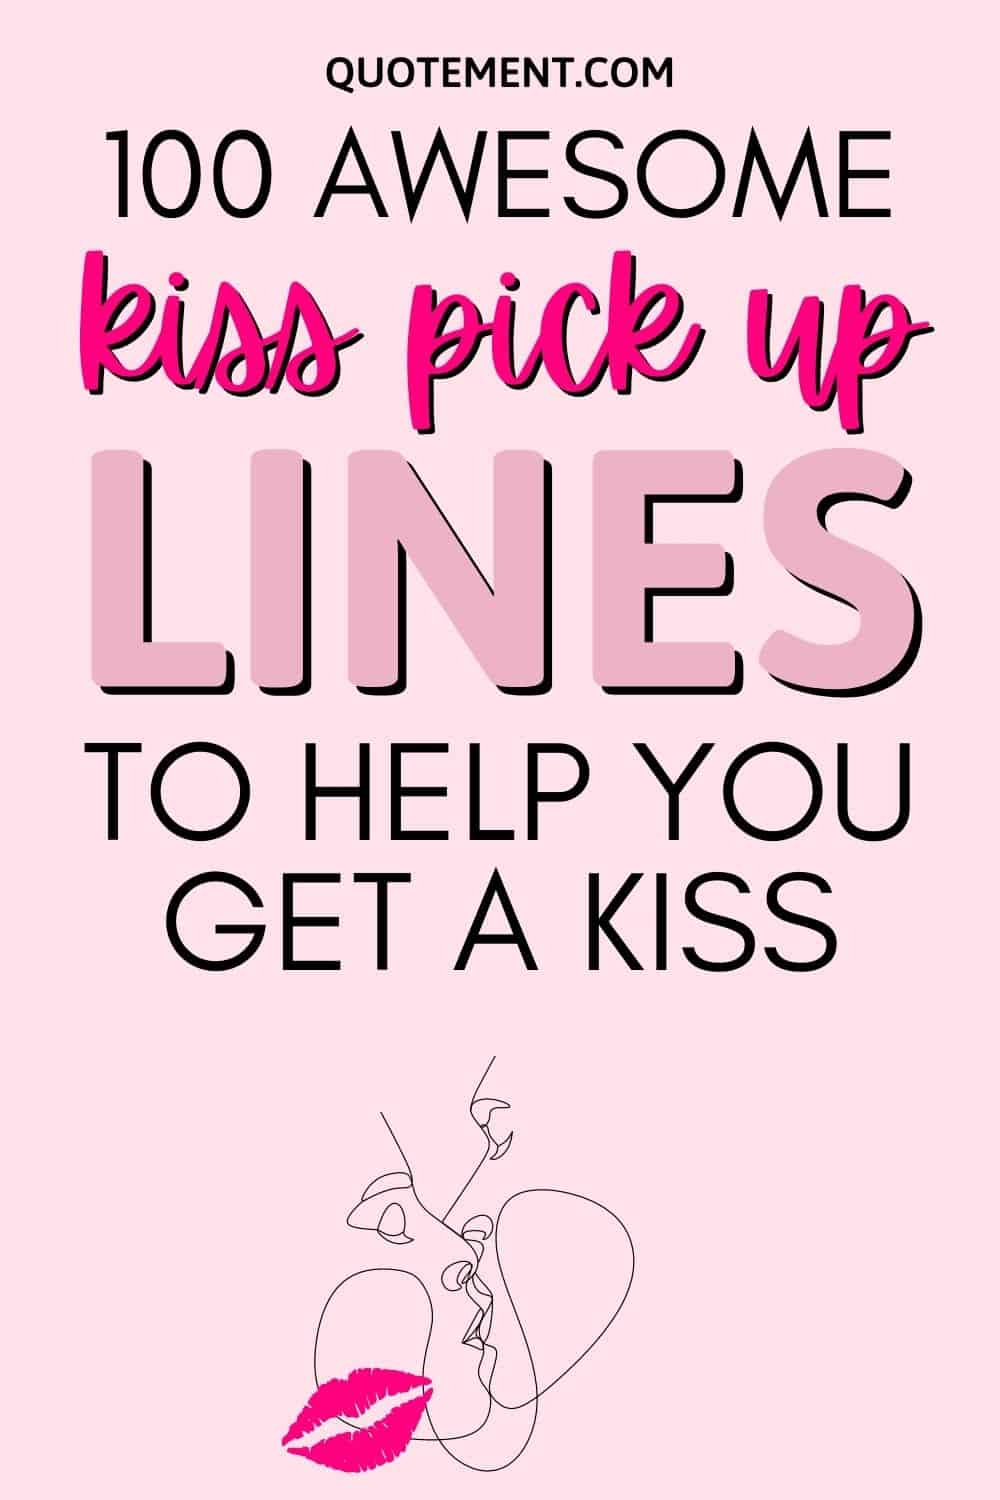 100 Awesome Kiss Pick Up Lines To Help You Get A Kiss